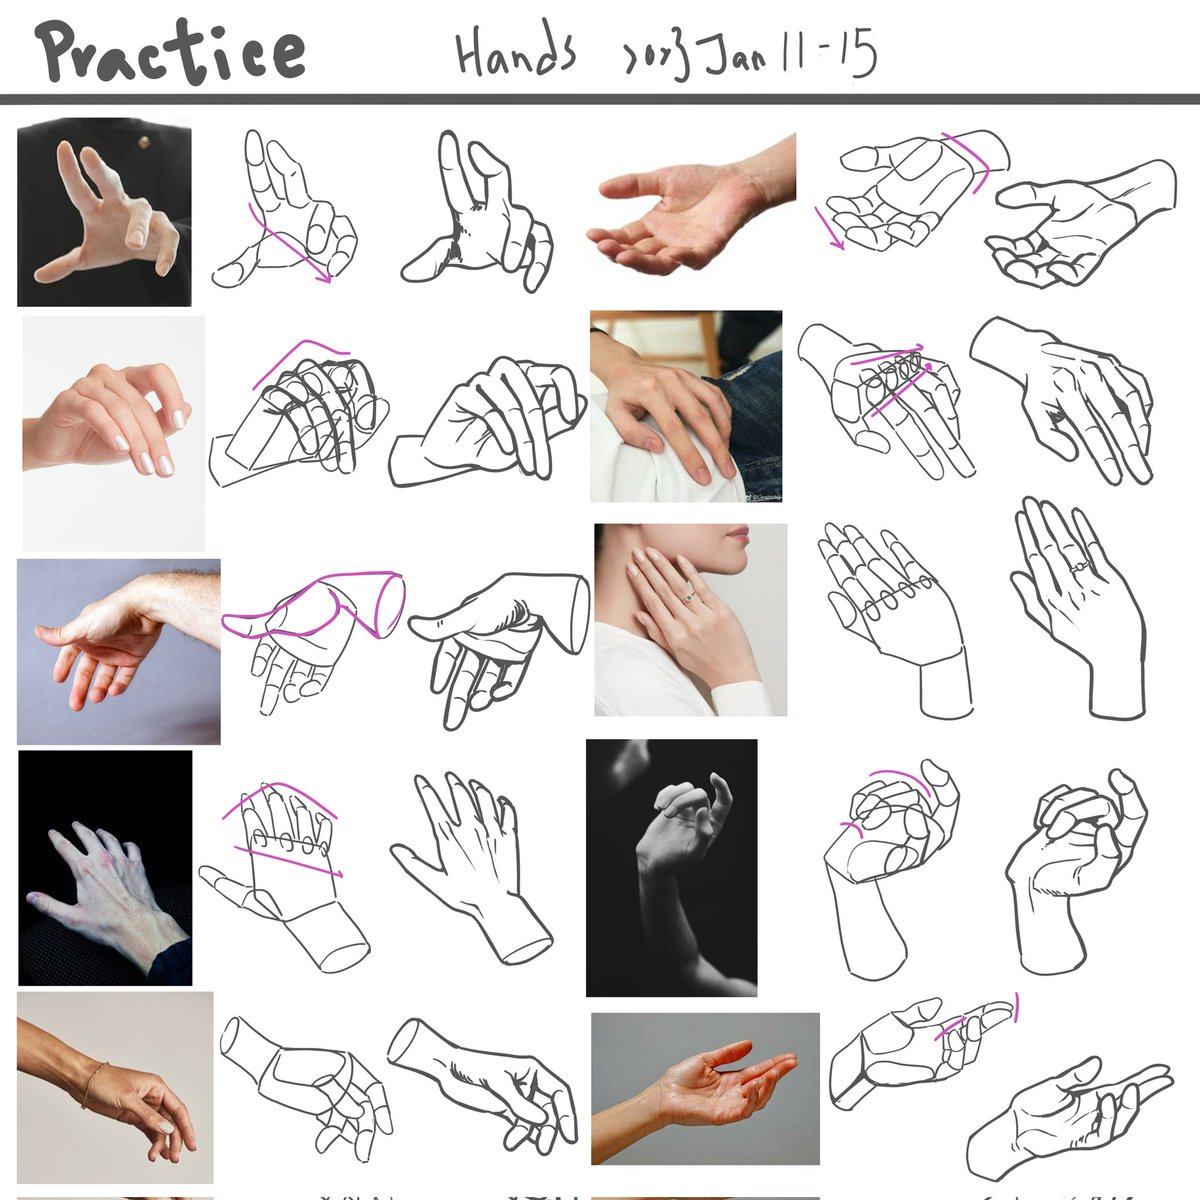 【Daily practice】

Goal : hands and hands

Recognize which finger is front and which is behind, makes it more 3D. Palm turn still the hardest. 

#sketches #anatomydrawing #figuredrawing #lineofaction